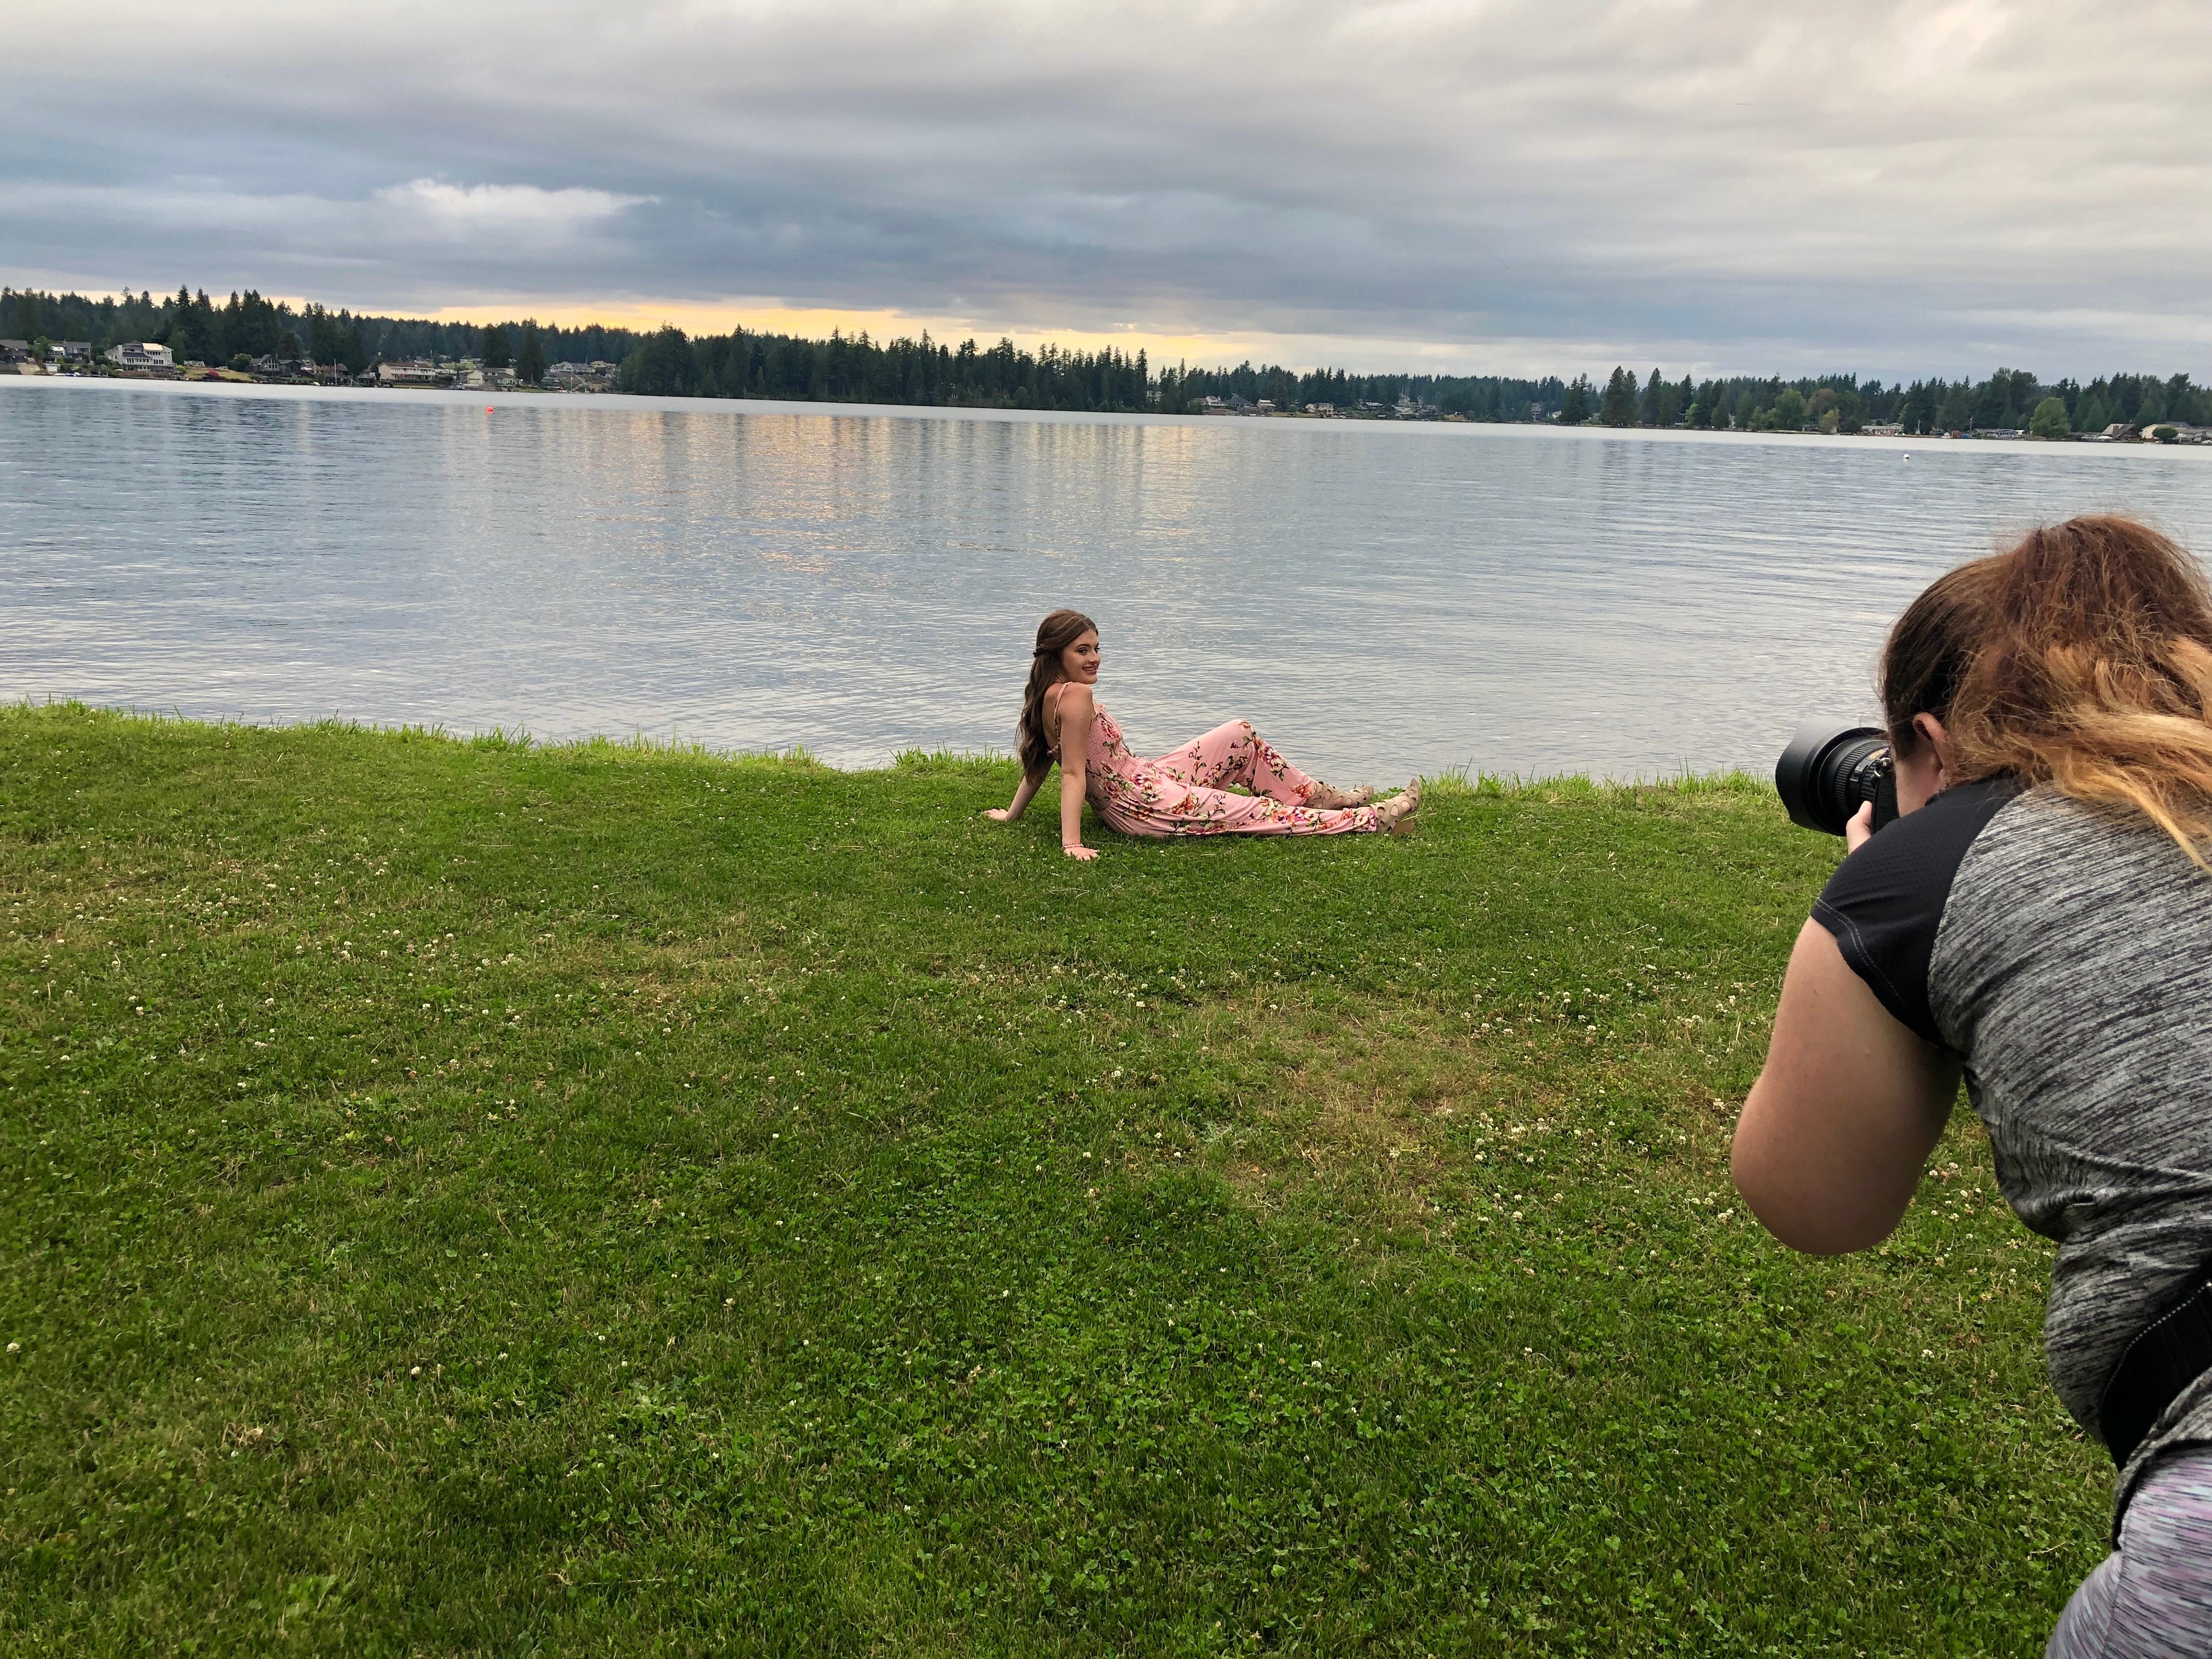 Senior Portraits by the Water | Behind the Scenes with Tacoma Senior Photographer Amanda Howse